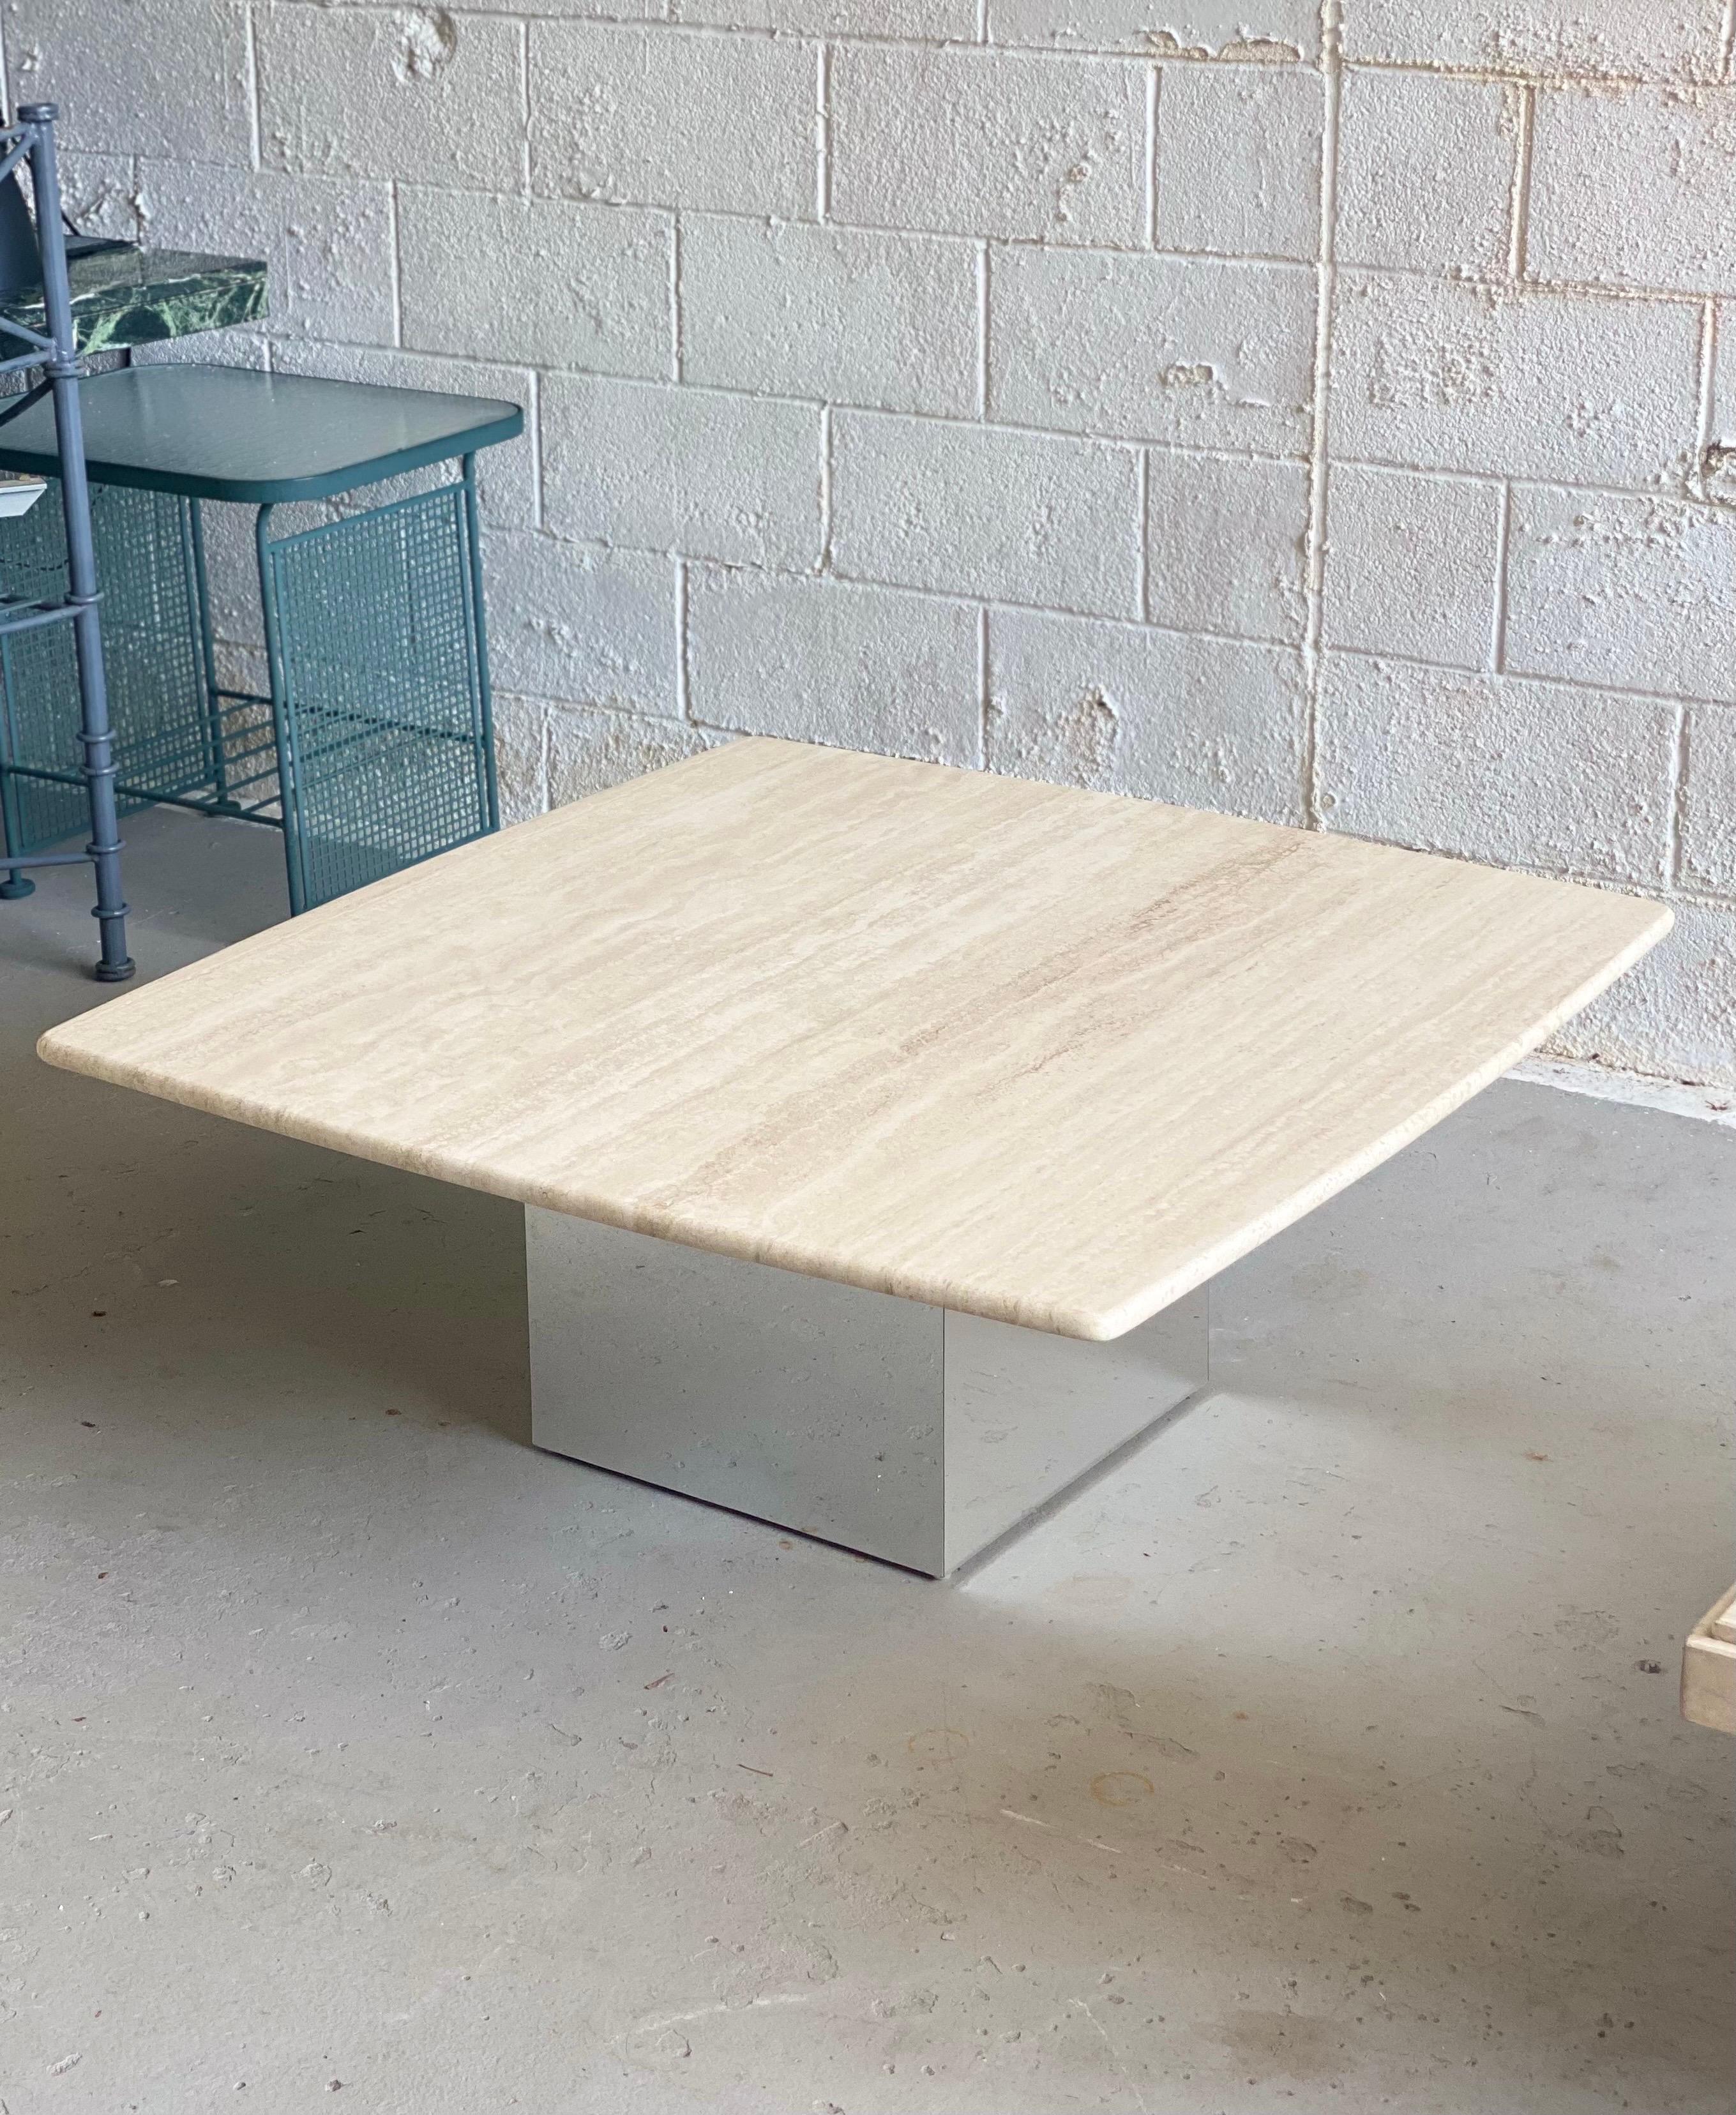 We are very pleased to offer a classic, chic coffee table, circa the 1970s. This coffee table is a beautiful balance of simple forms and finishes. A square base, with a metal chrome finish, makes a stable support for a heavy, square travertine stone